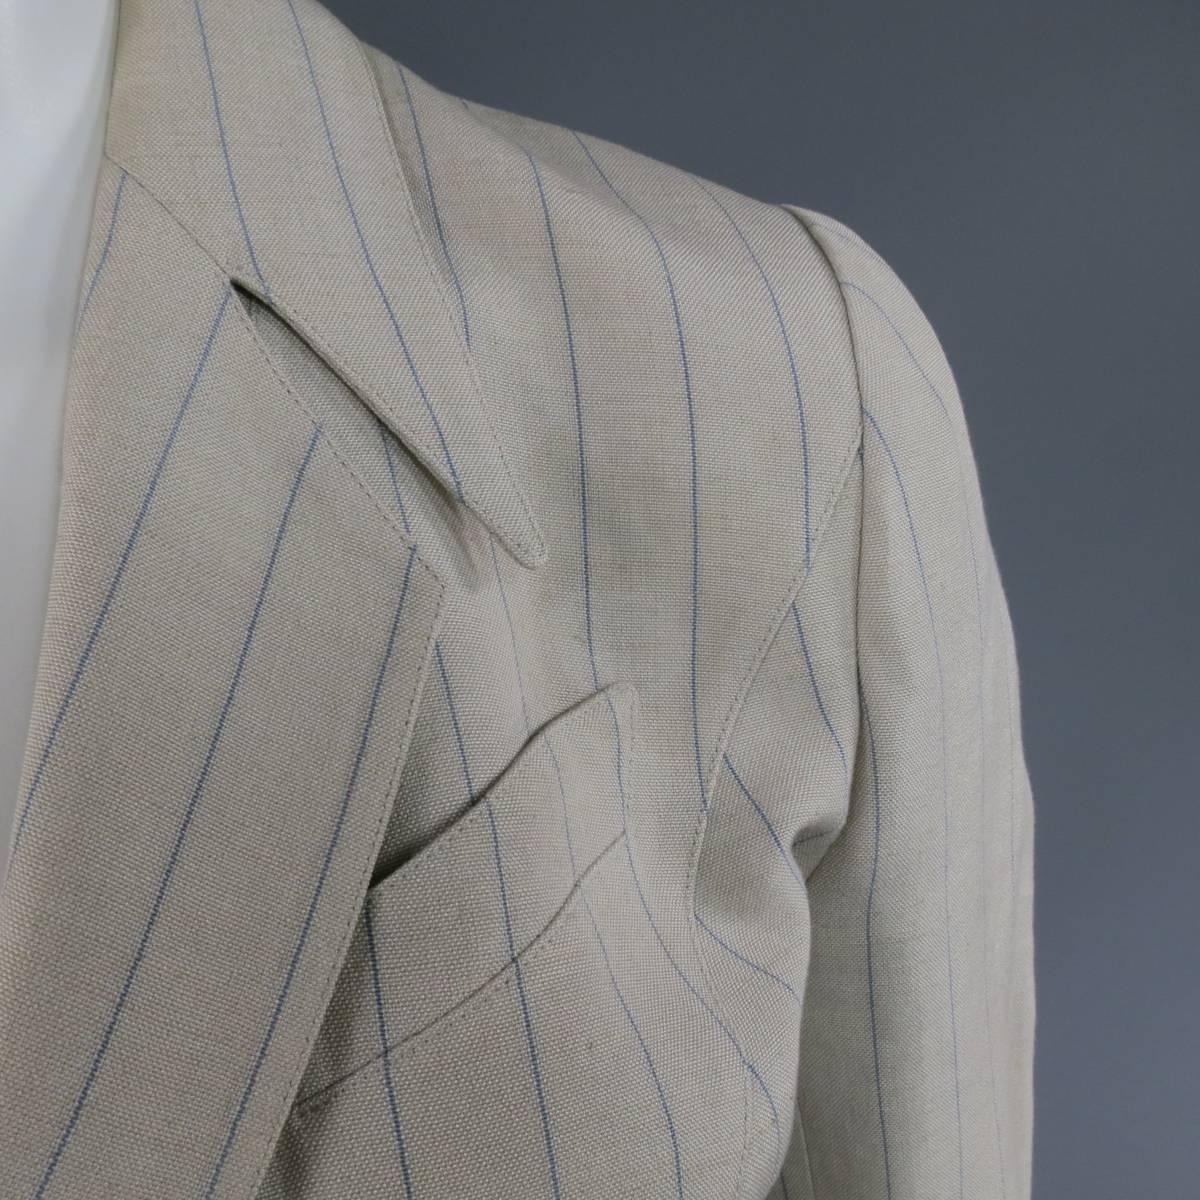 This gorgeous THIERRY MUGLER vintage jacket comes in a beige and blue pinstriped linen poly blend and features a double breasted snap closure, signature downward pointed peak lapel, slanted flap pockets and impeccable hourglass tailoring with a